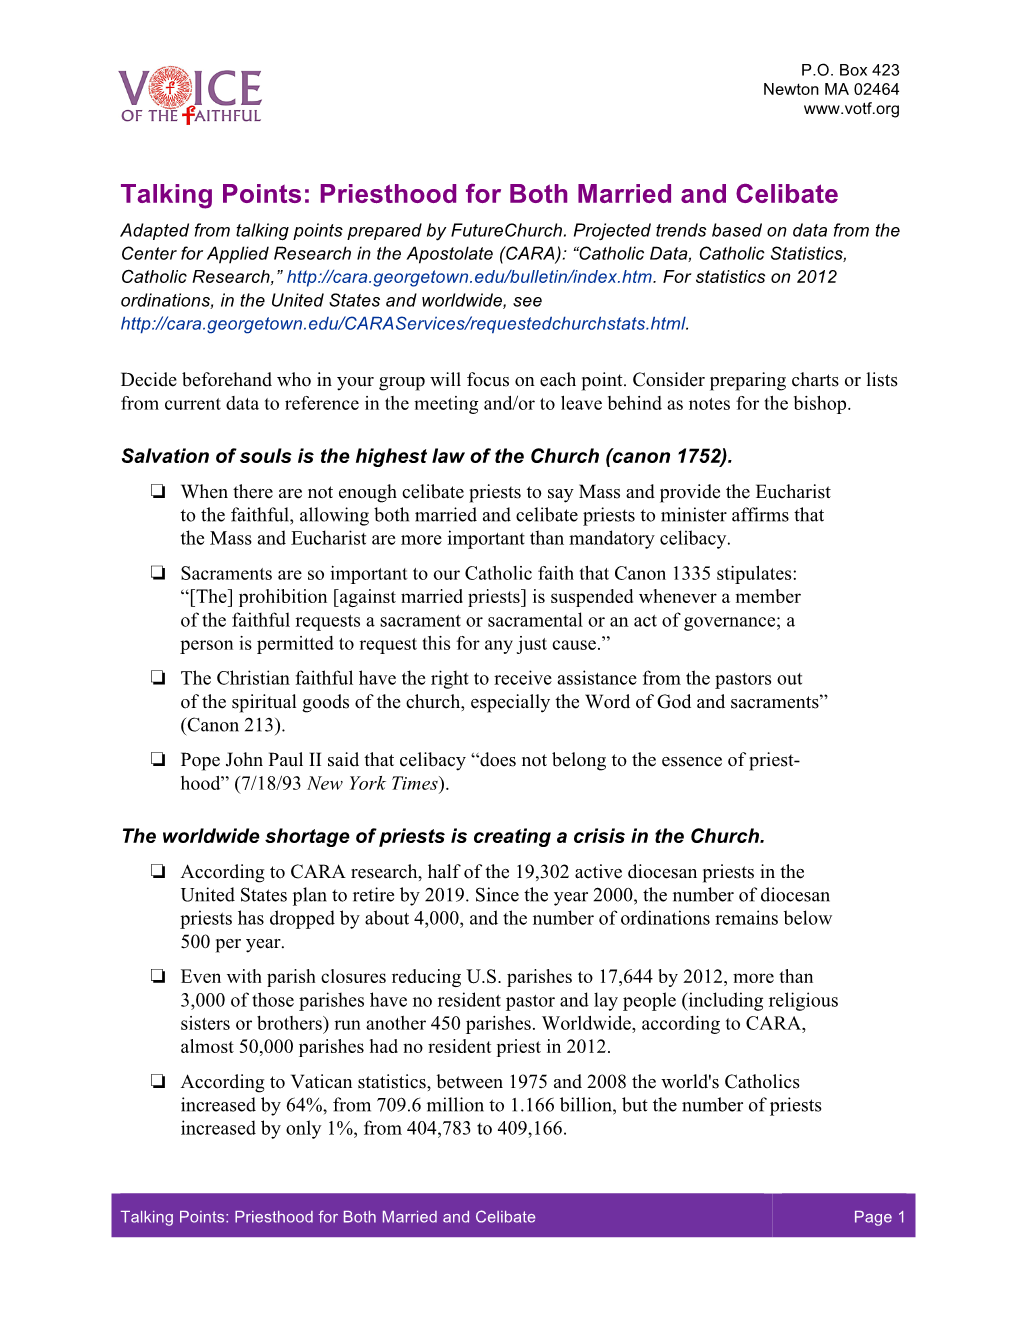 Talking Points: Priesthood for Both Married and Celibate Adapted from Talking Points Prepared by Futurechurch